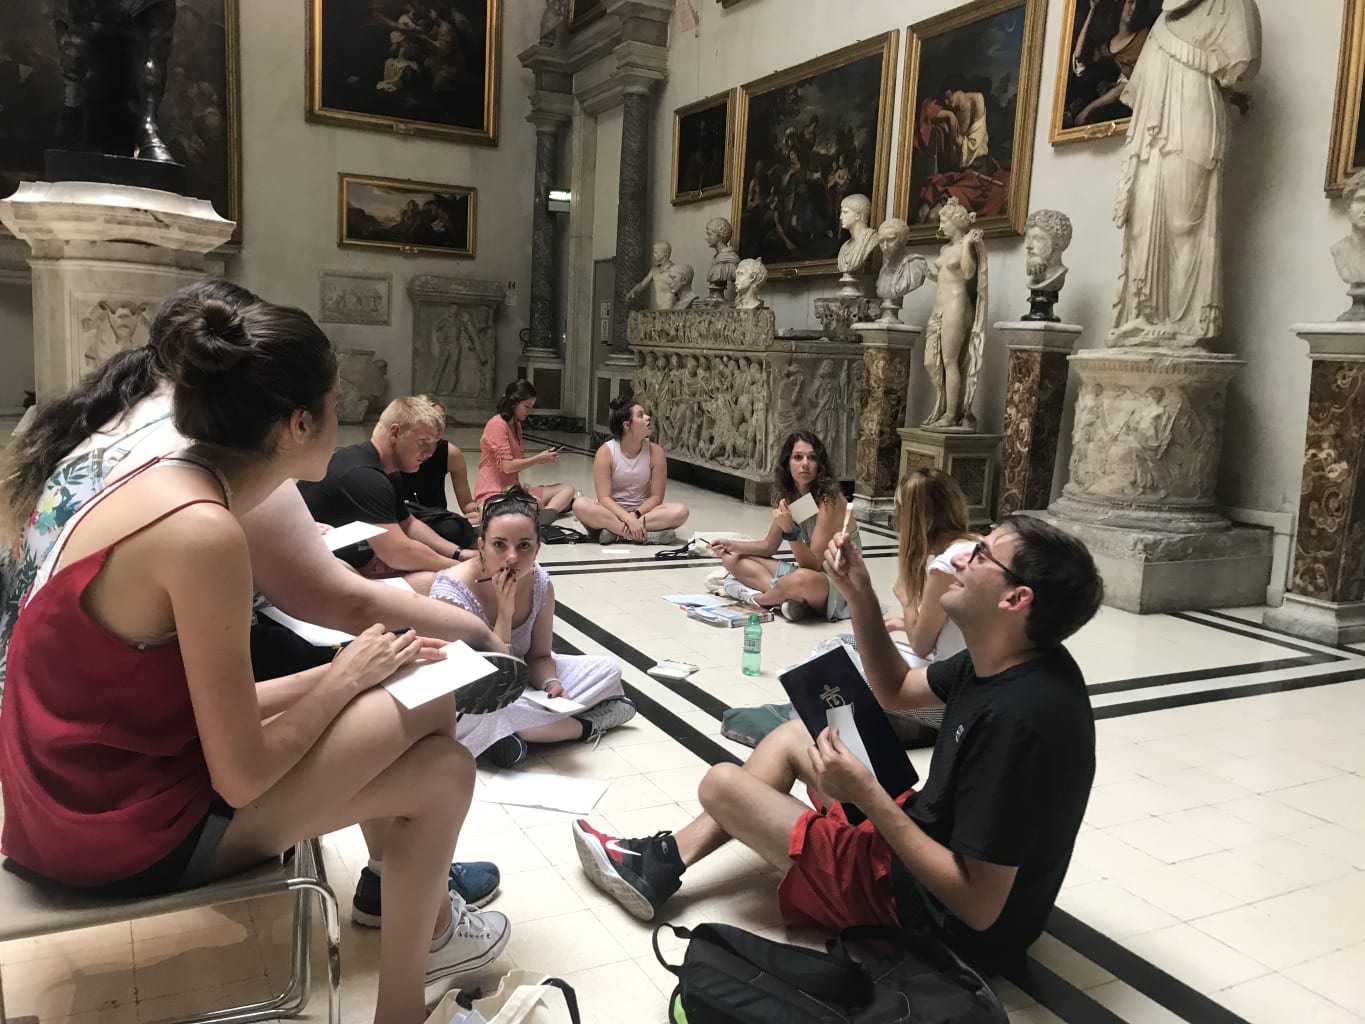 Students studying in an art museum.